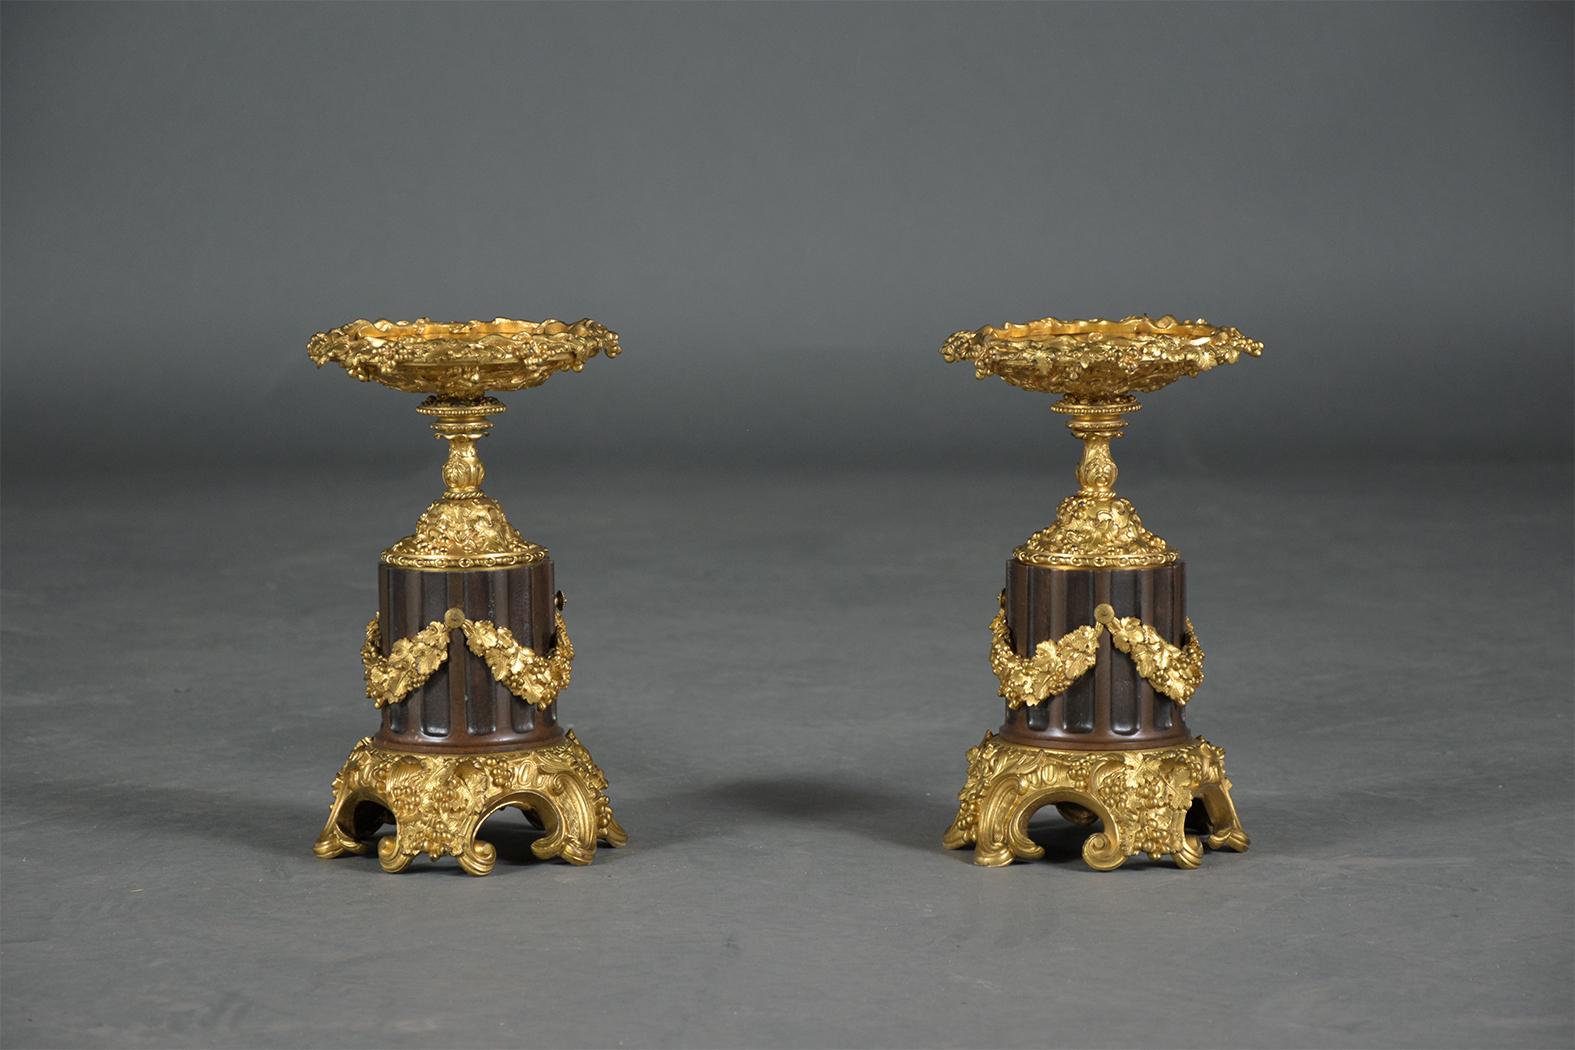 Carved Early 19th-Century French Bronzed Urns with Gold-Plated Garland Decoration For Sale